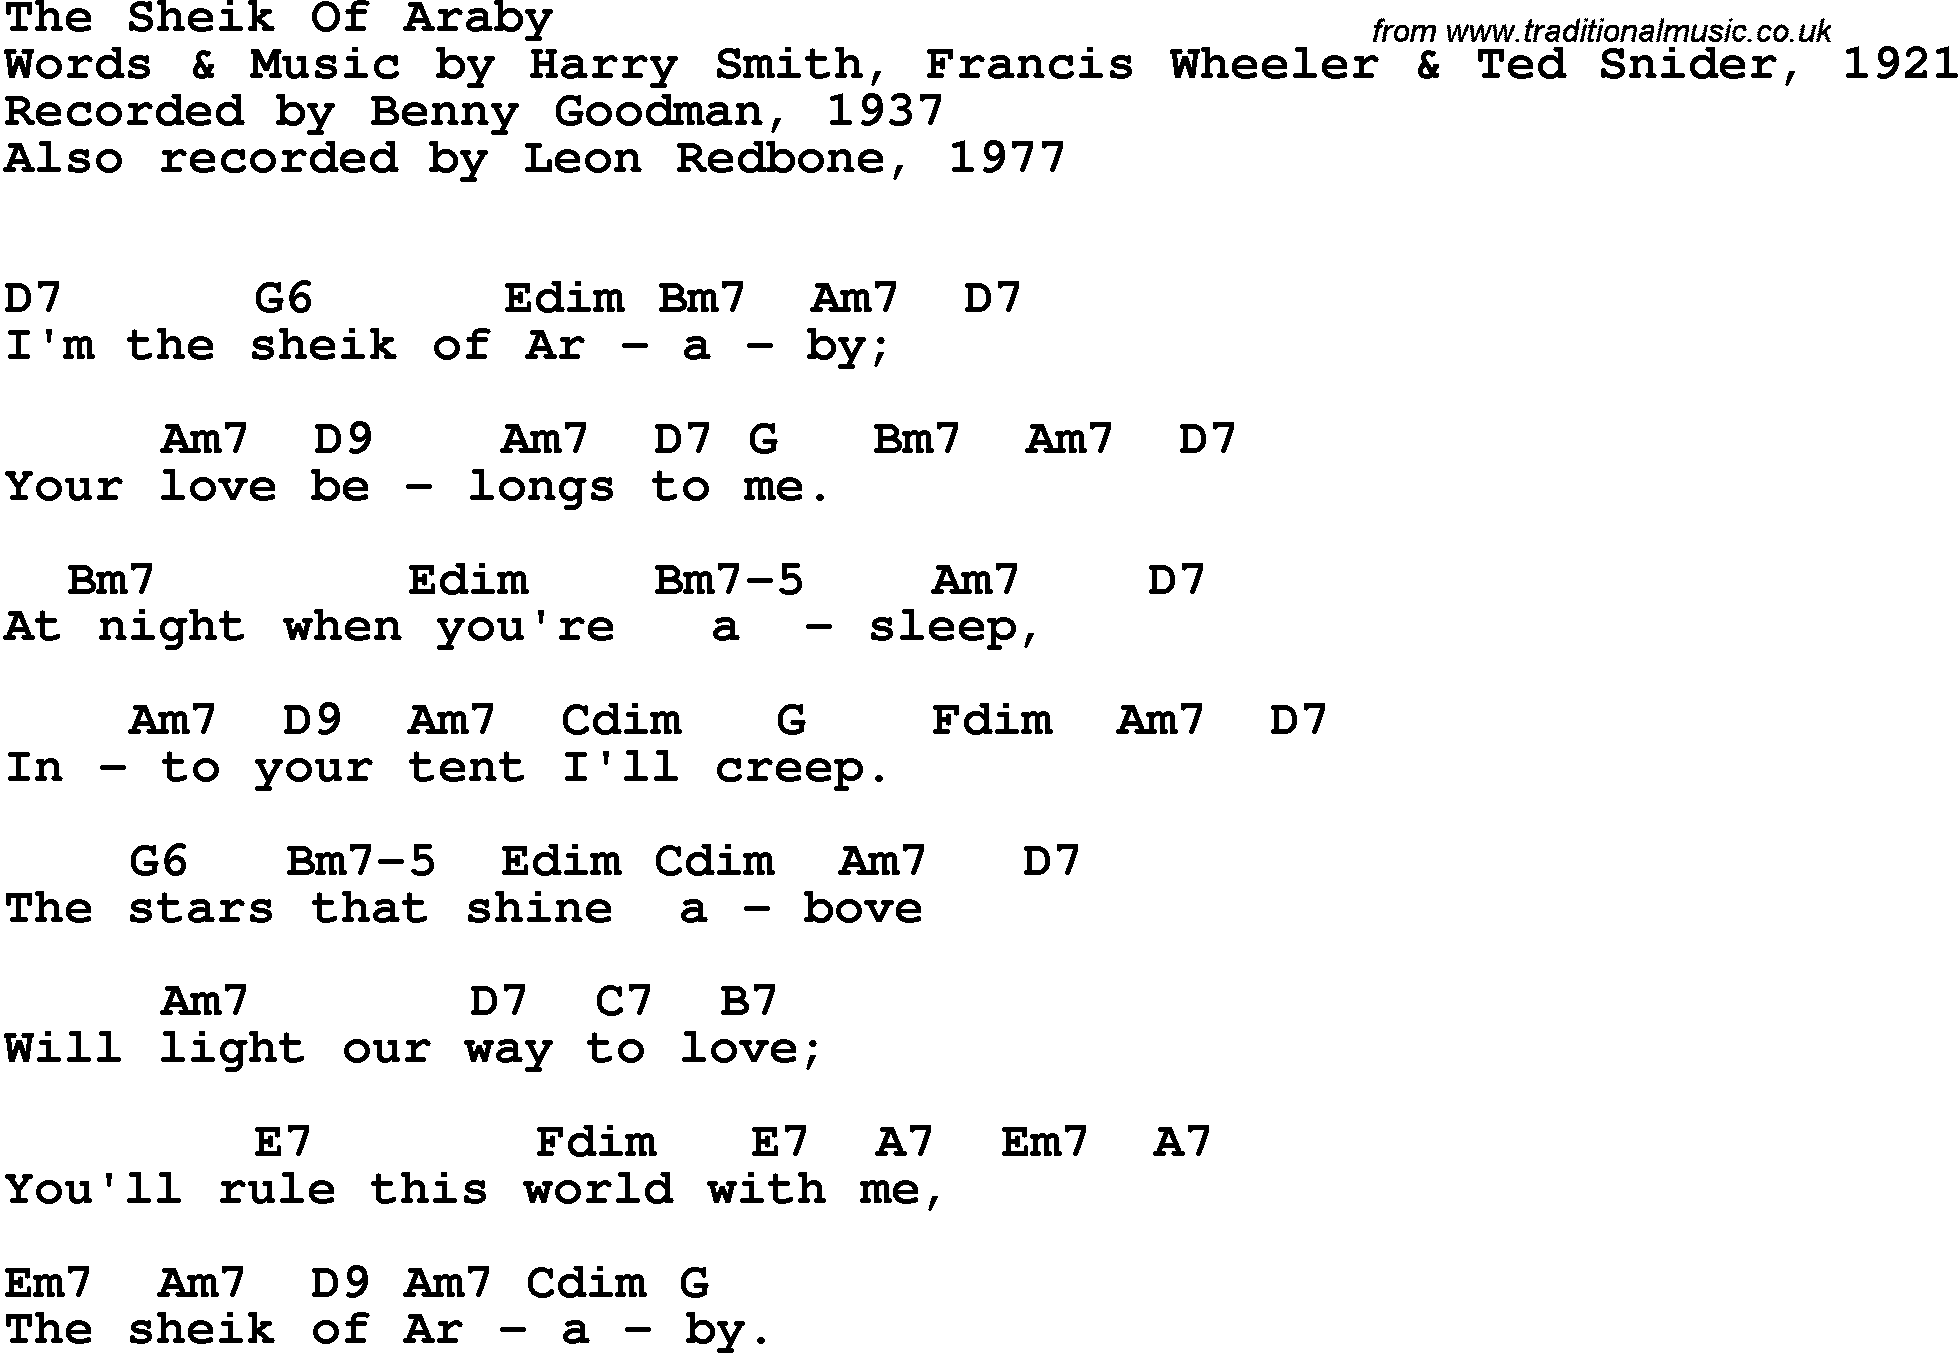 Song Lyrics with guitar chords for Sheik Of Araby, The - Benny Goodman, 1937